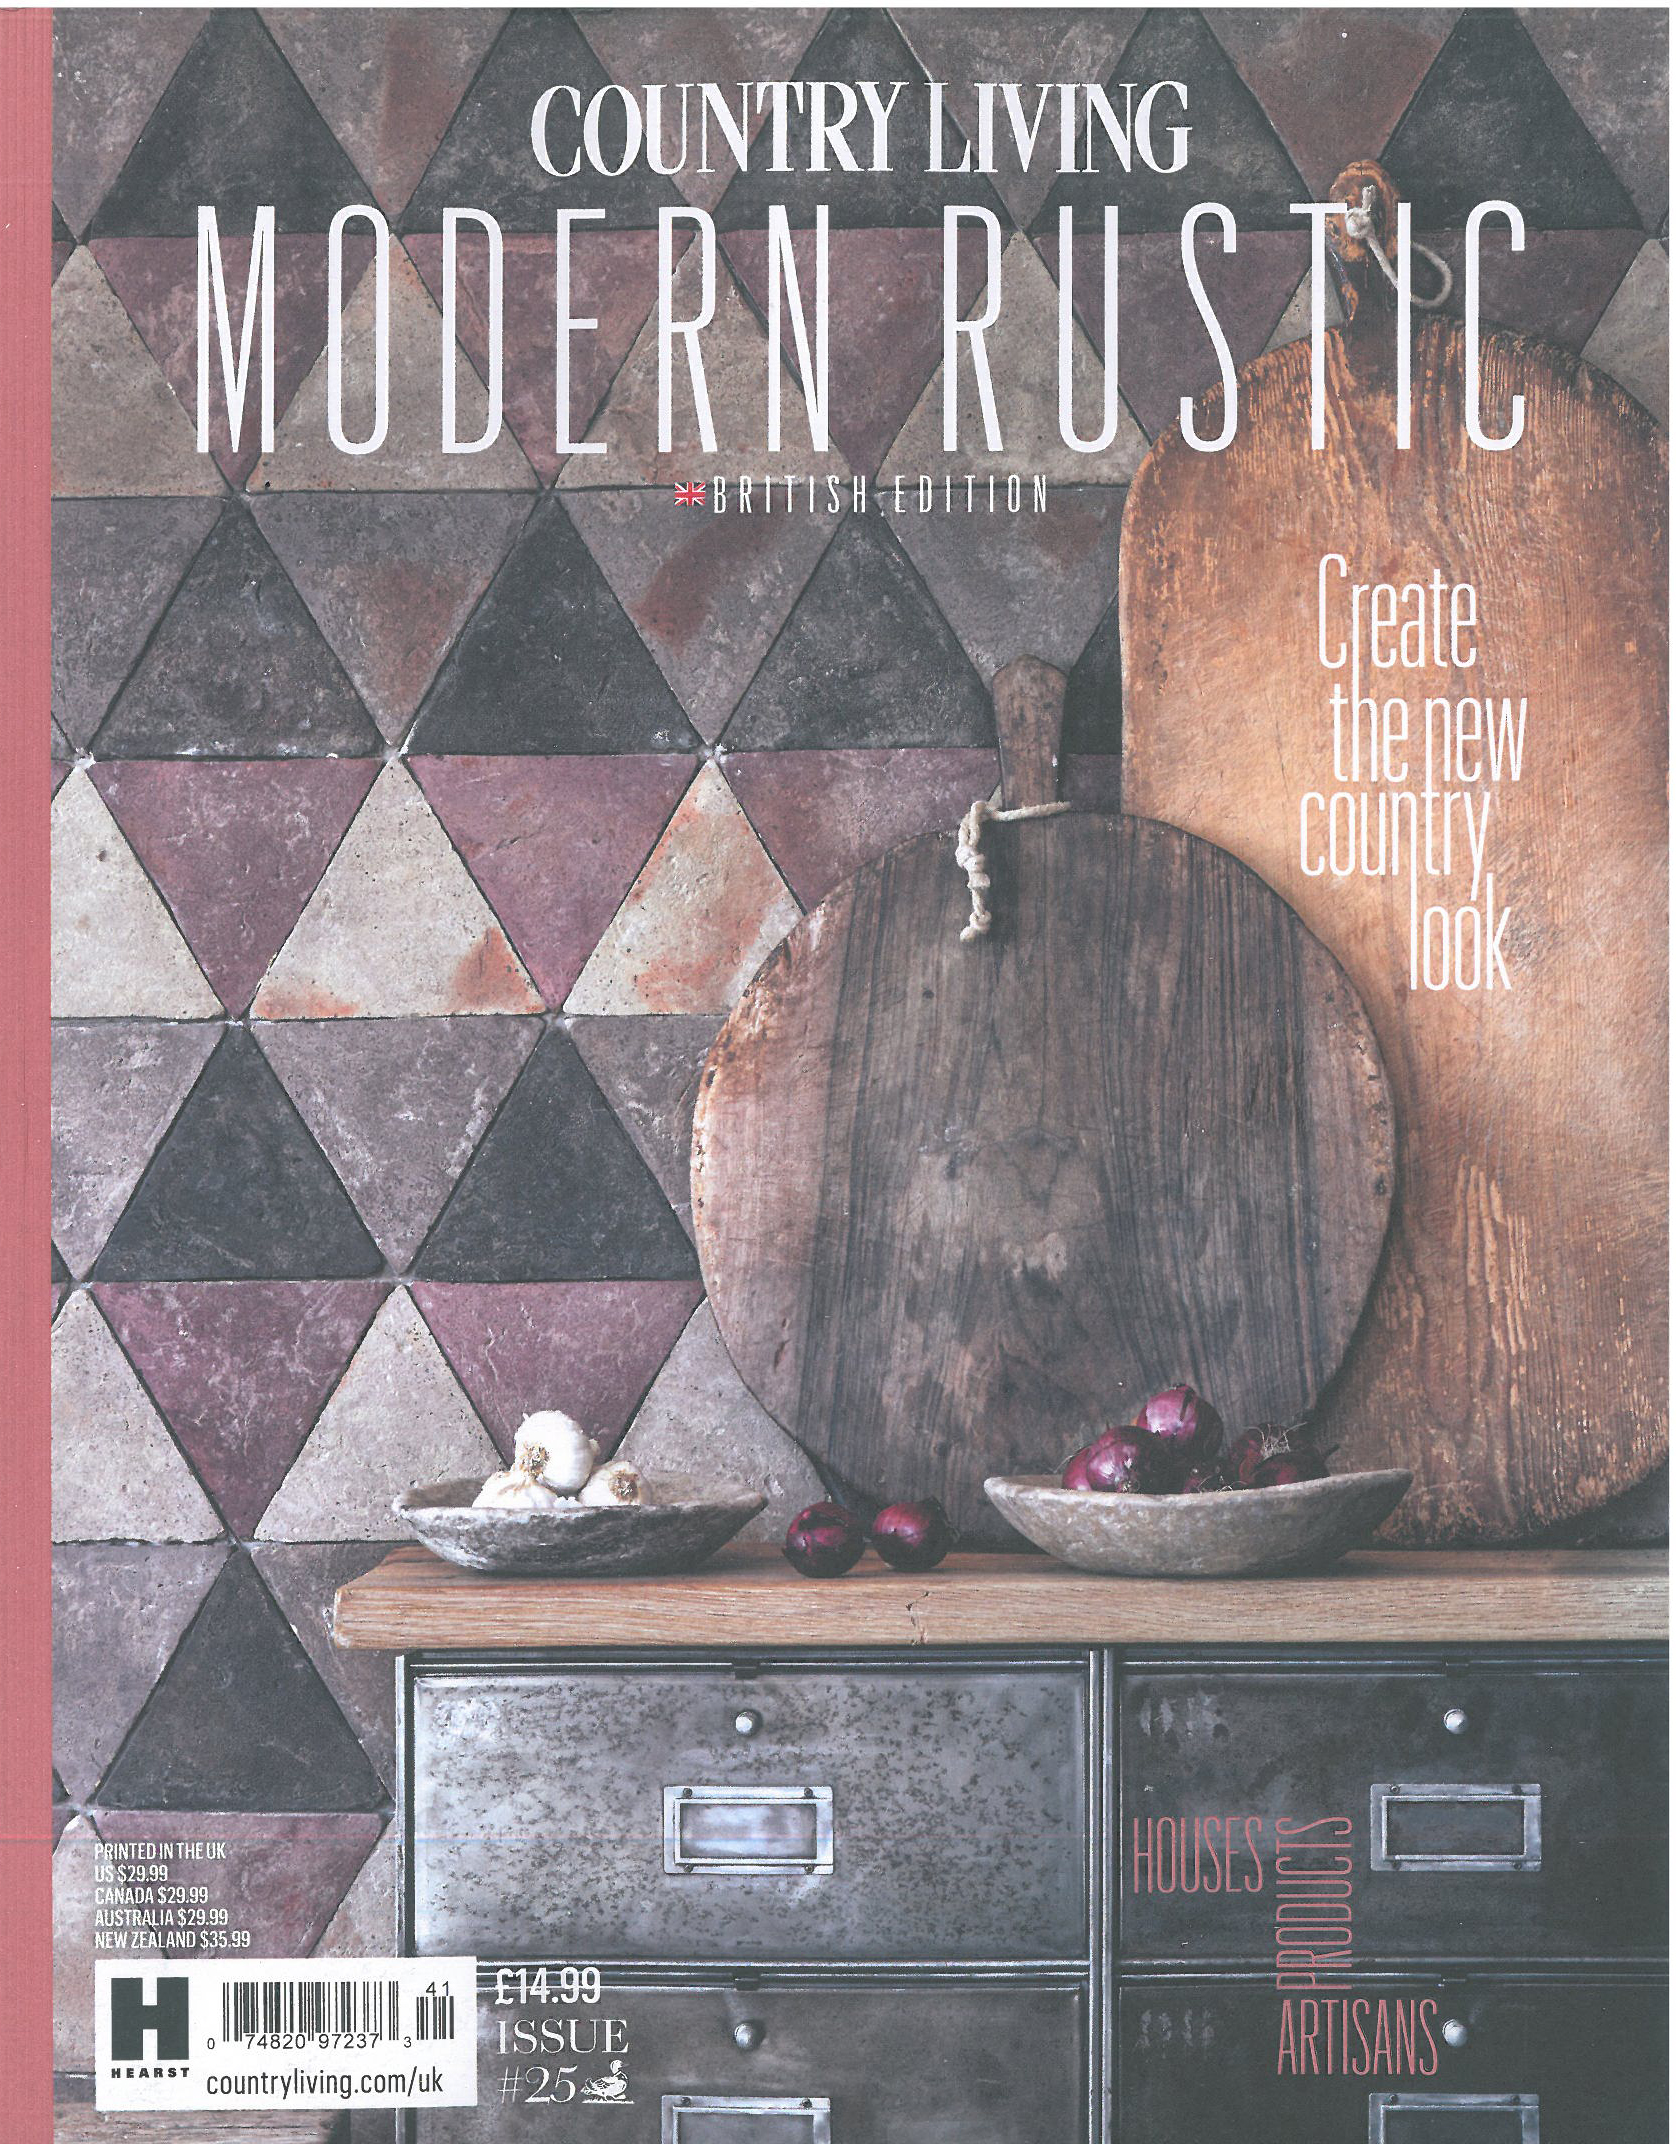 COUNTRY LIVING MODERN RUSTIC